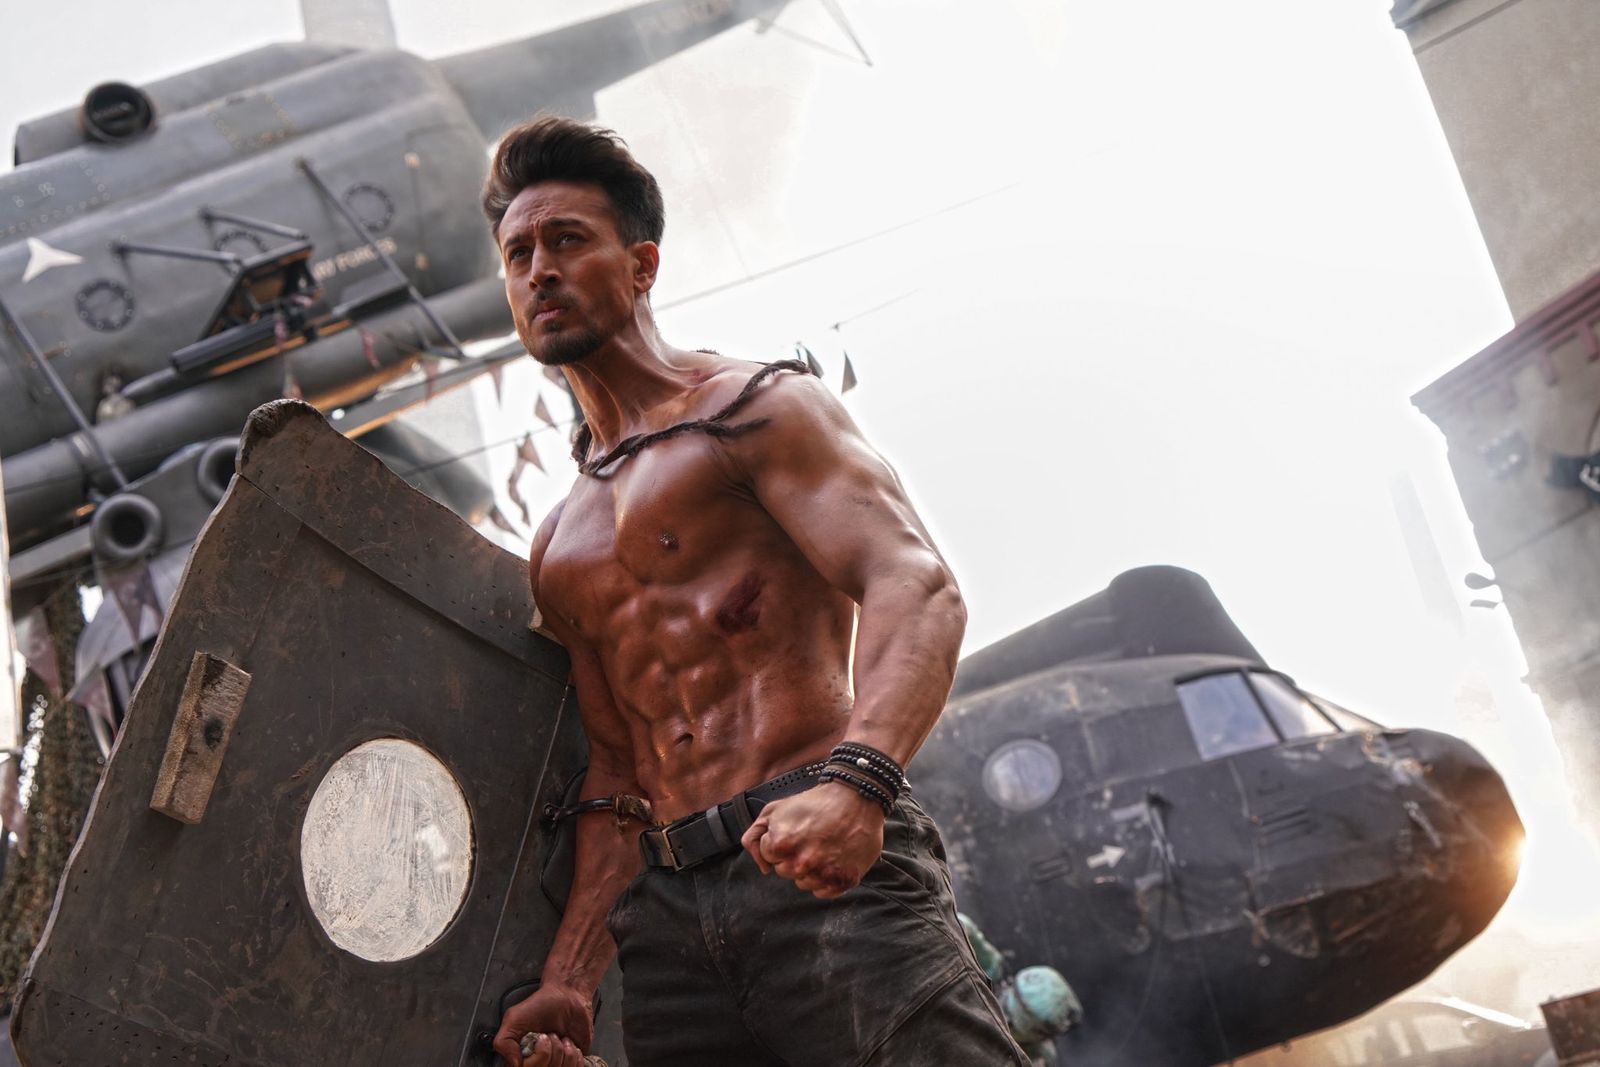 Baaghi 3 Day 7 Box-Office: Tiger Shroff Starrer Pockets A Good Rs. 90.67 Crores Despite All Odds